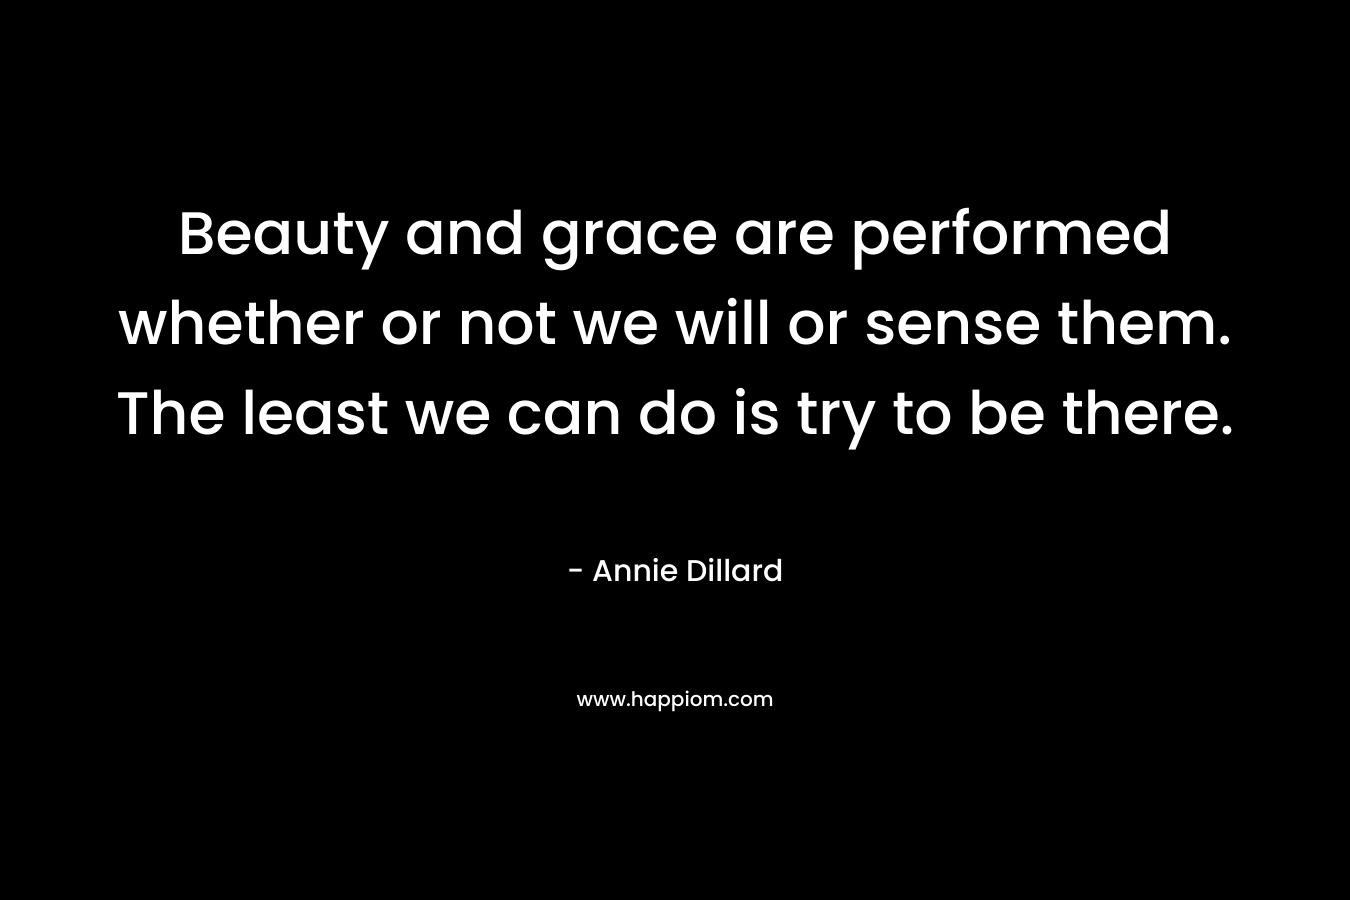 Beauty and grace are performed whether or not we will or sense them. The least we can do is try to be there.